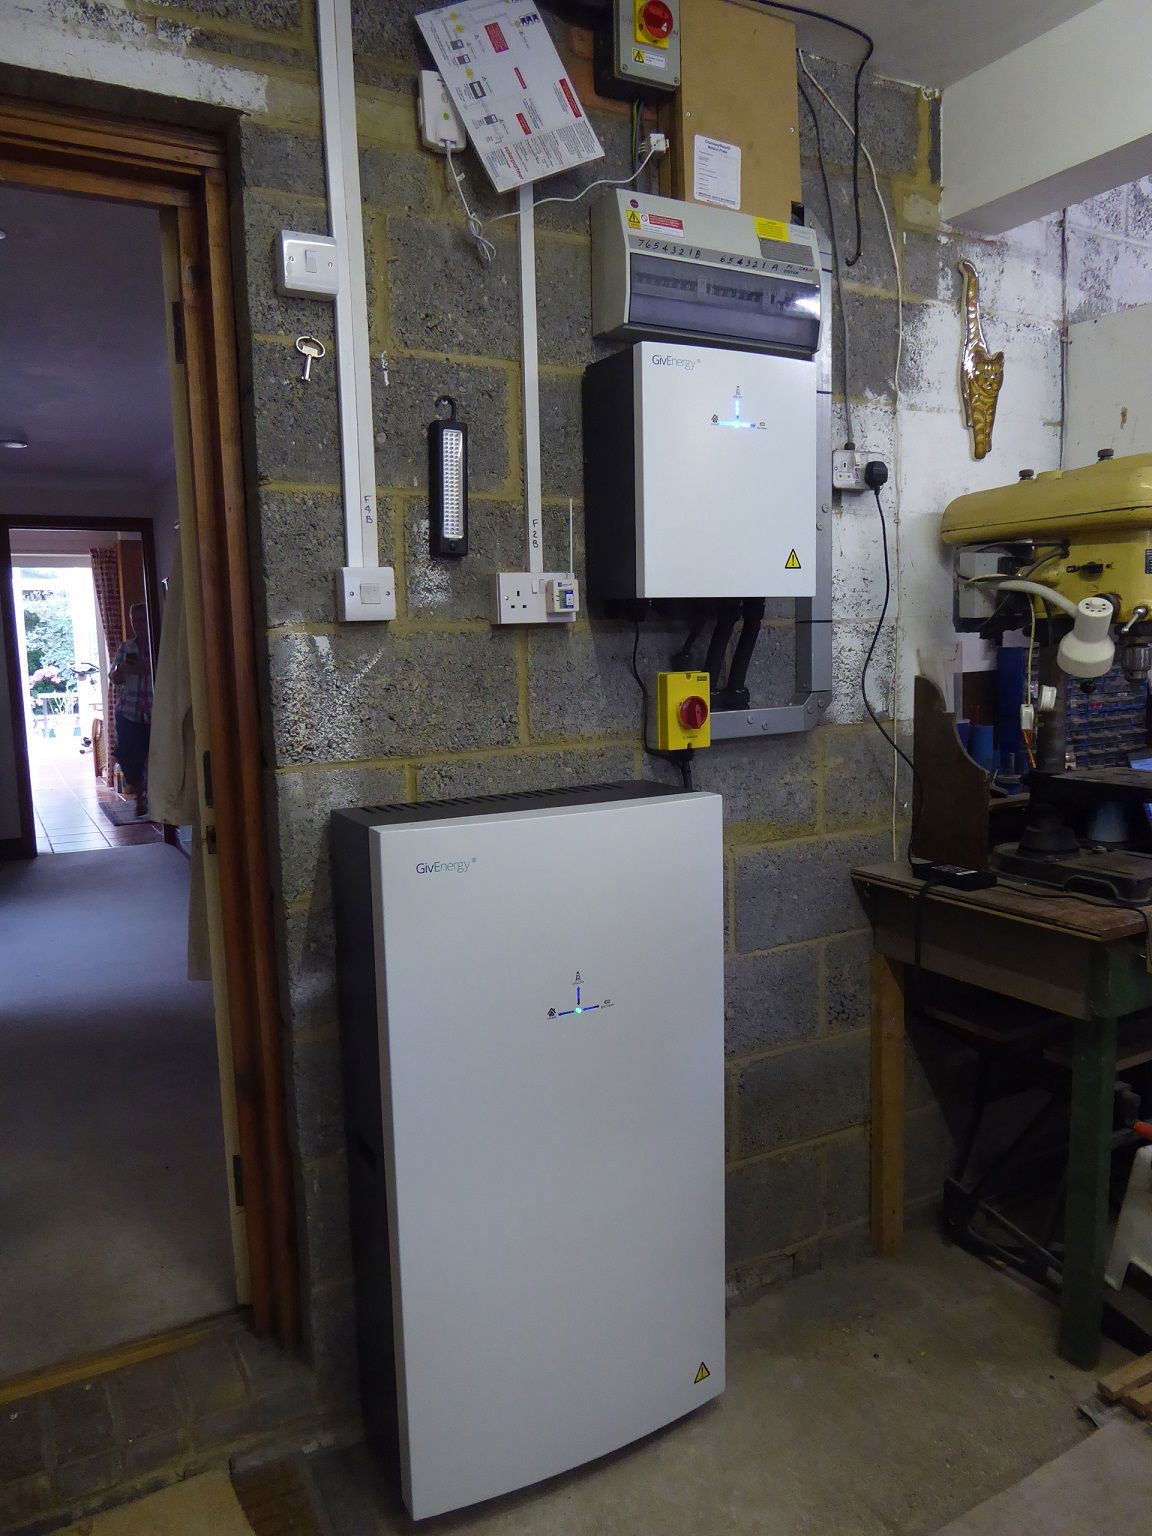 Solar Partner installs a NEW GivEnergy All in One 13.5 kW battery and Gateway